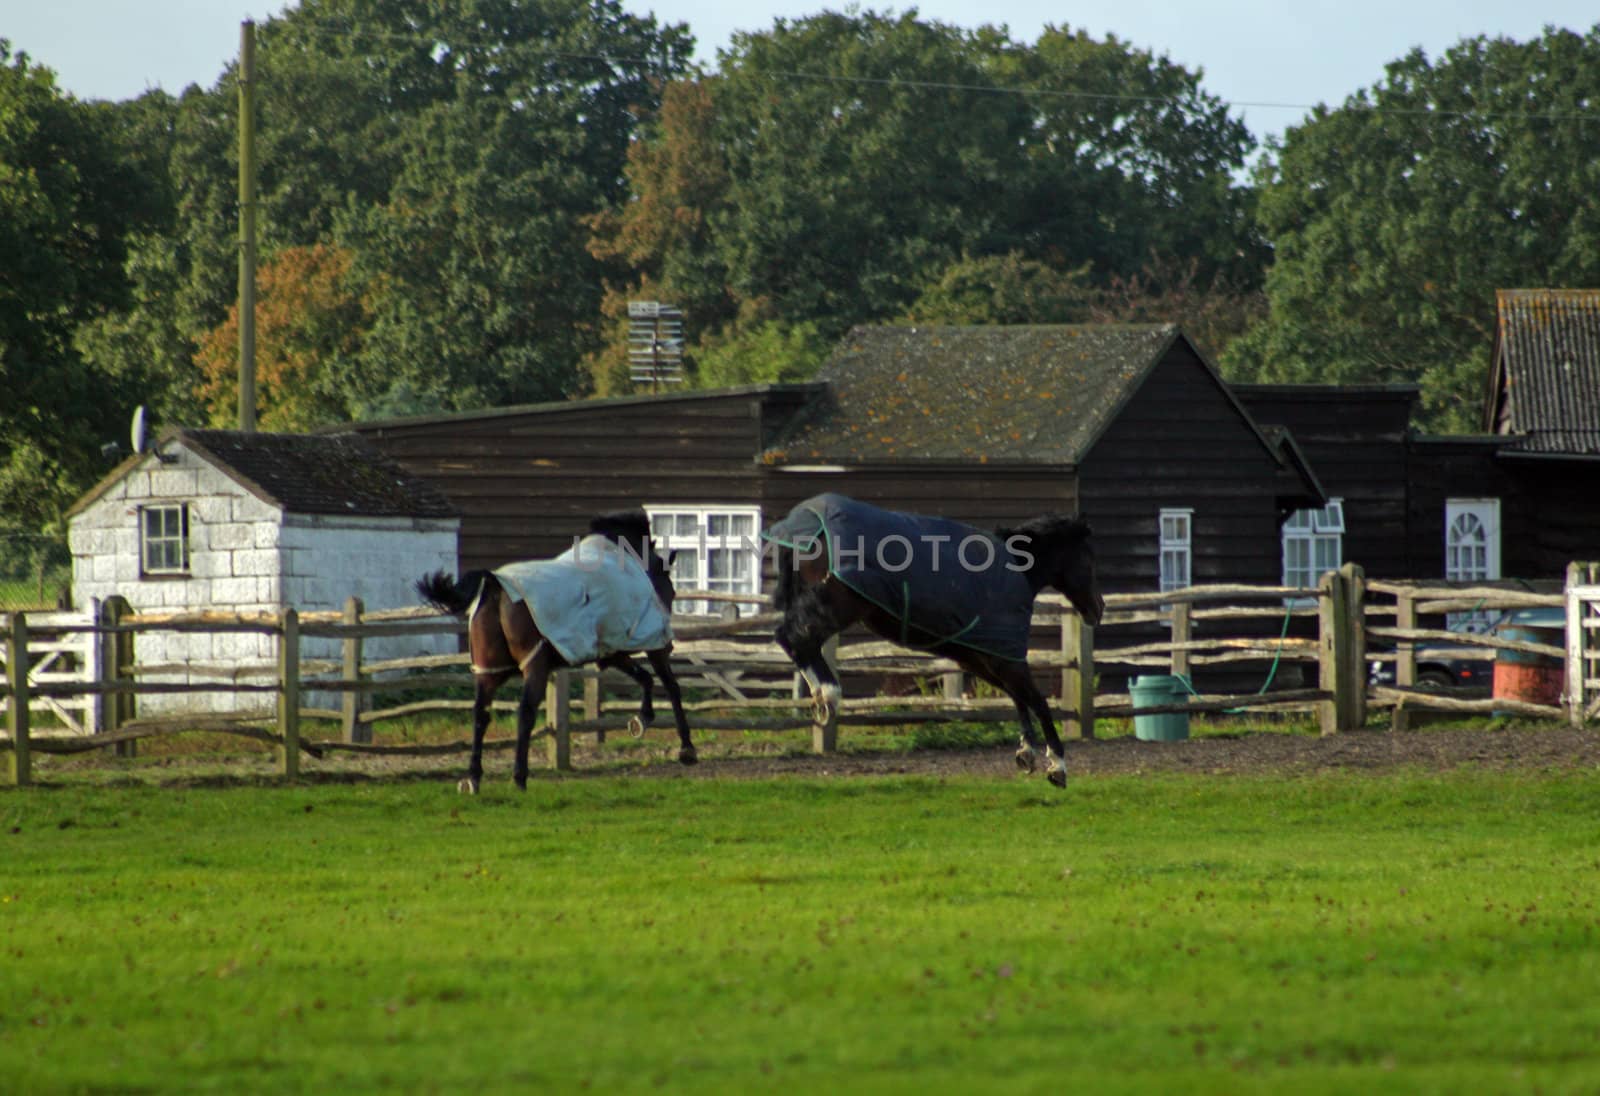 Horses having fun jumping around in a field